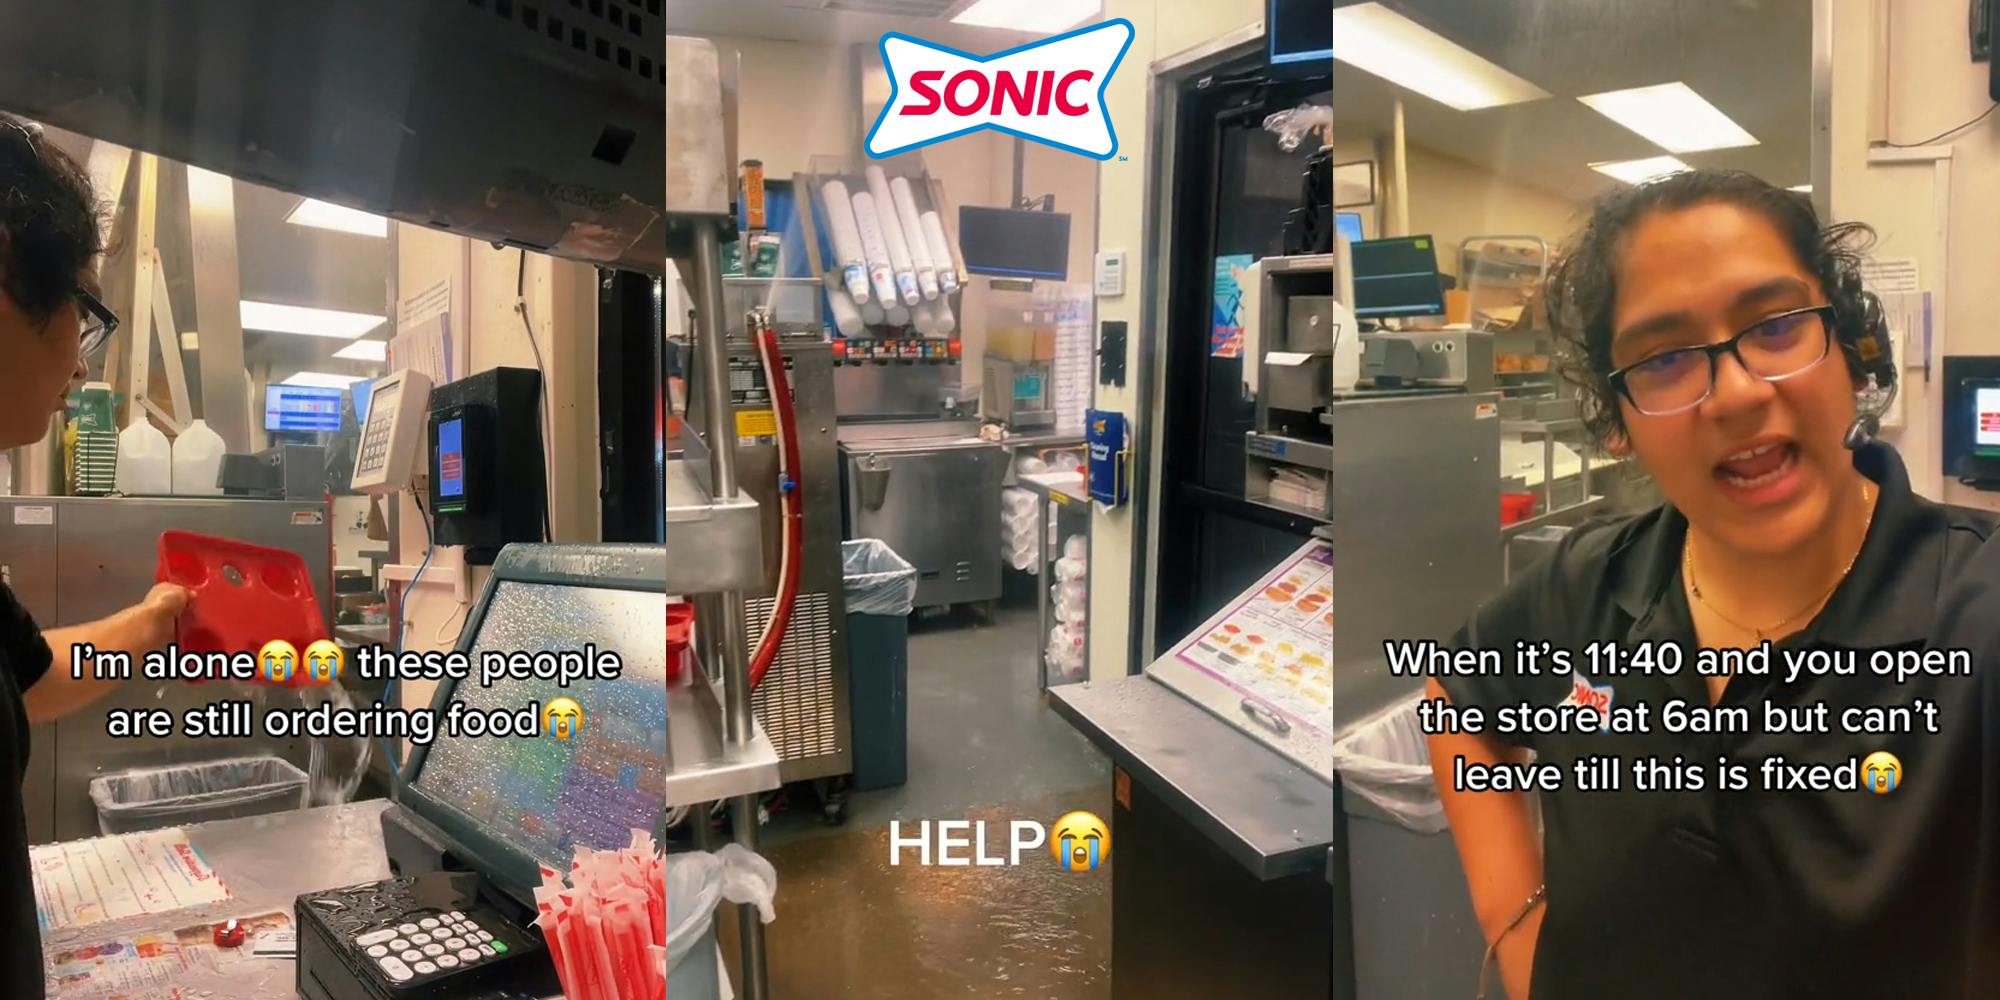 Sonic worker dumping water out of bin with caption "I'm alone these people are still ordering food" (l) Sonic kitchen with hose spraying water causing flood with caption "HELP" with Sonic logo above (c) Sonic employee in kitchen with caption "When it's 11:40 and you open the store at 6am but can't leave till this is fixed" (r)